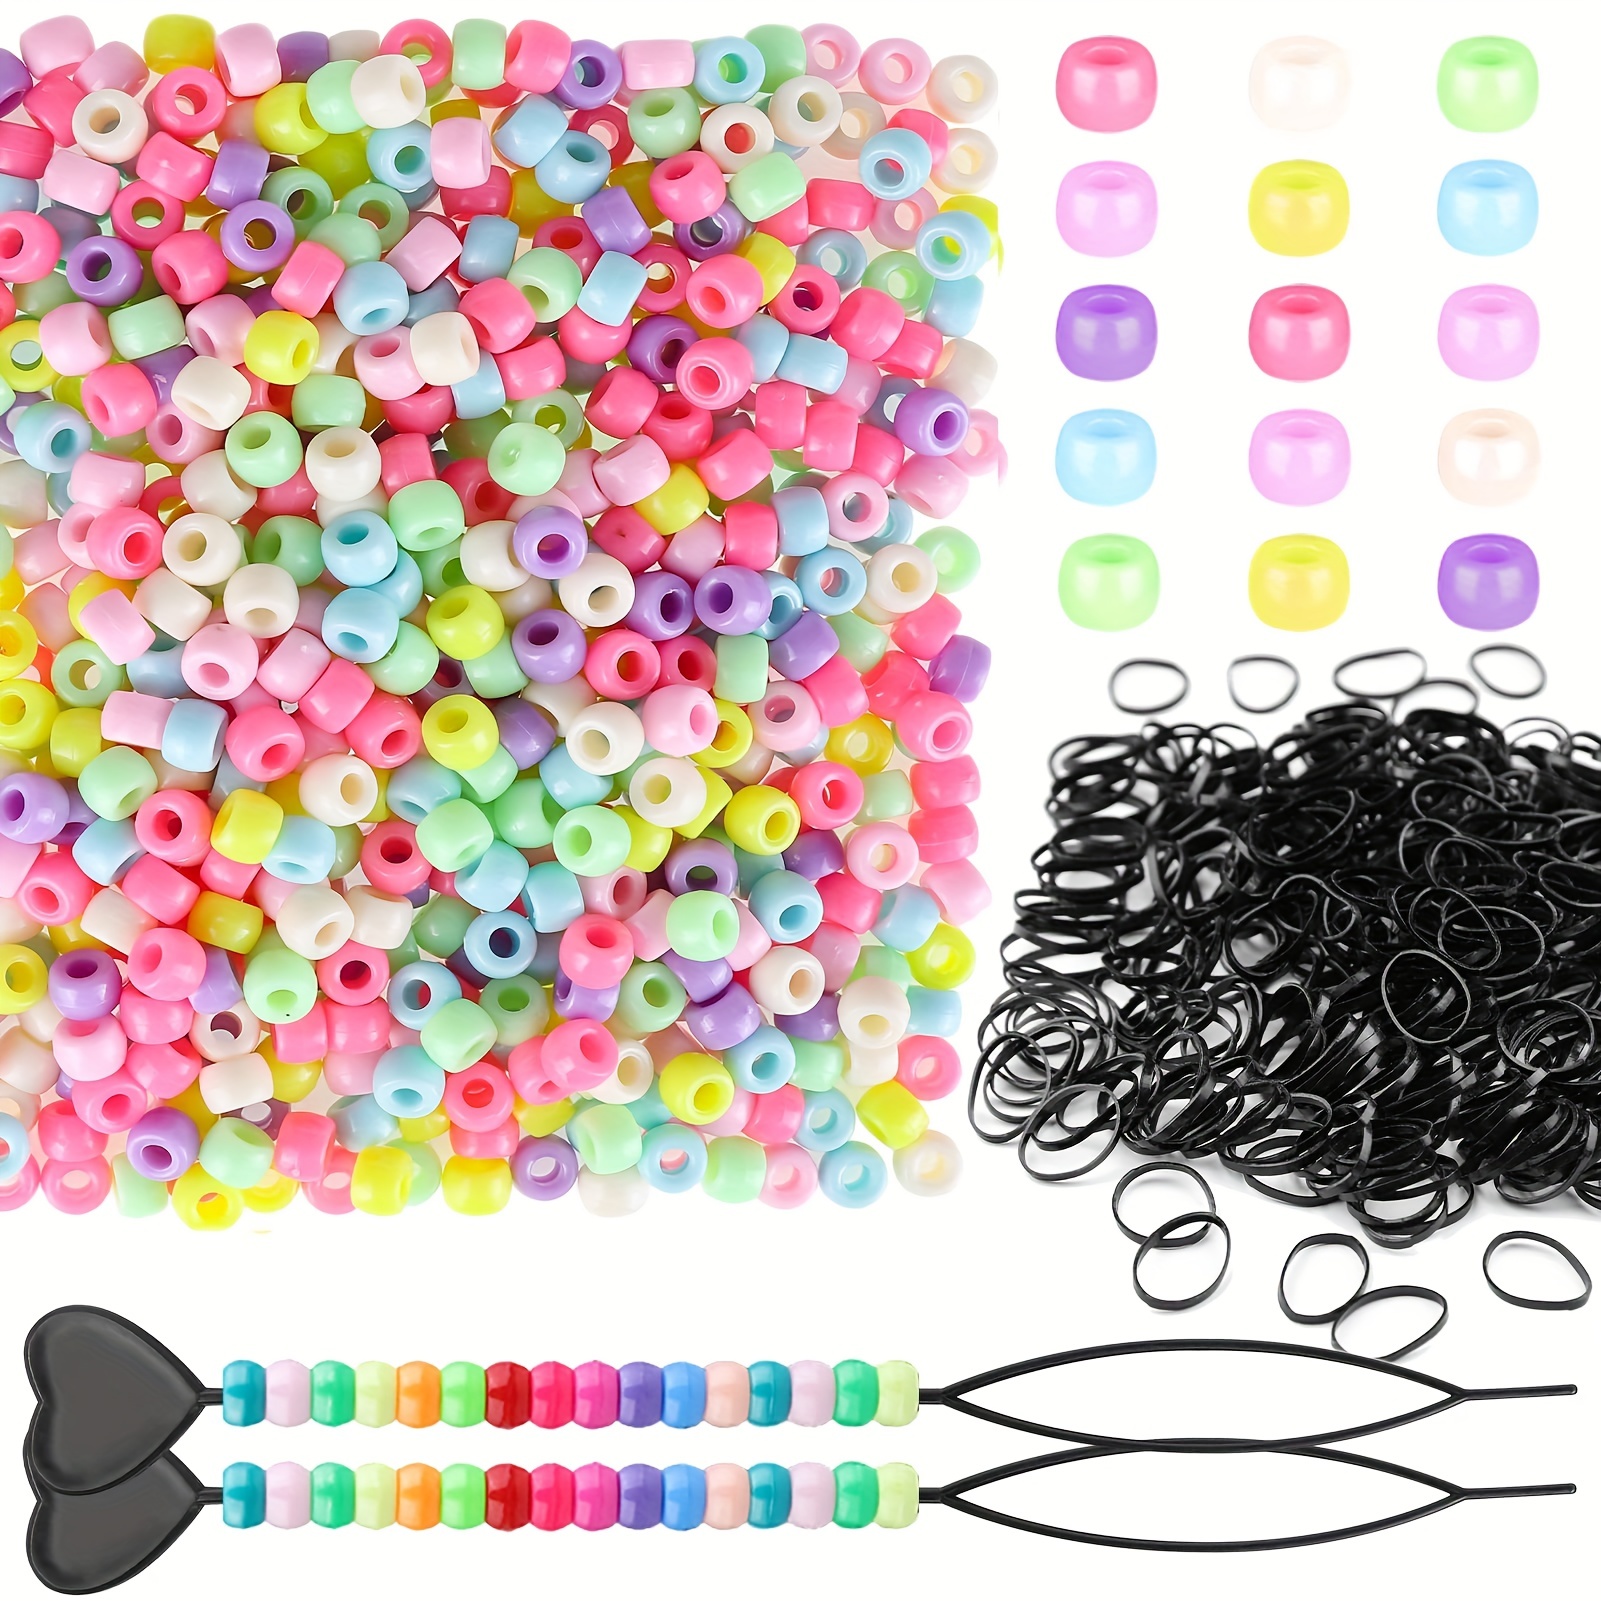  FOMIYES 90 Pcs Hairpin small beaders for hair braids quick  beaders for loading beads ponytail styling tool braiding tools hair braiding  tool braid tool small beaders for hair long headgear 